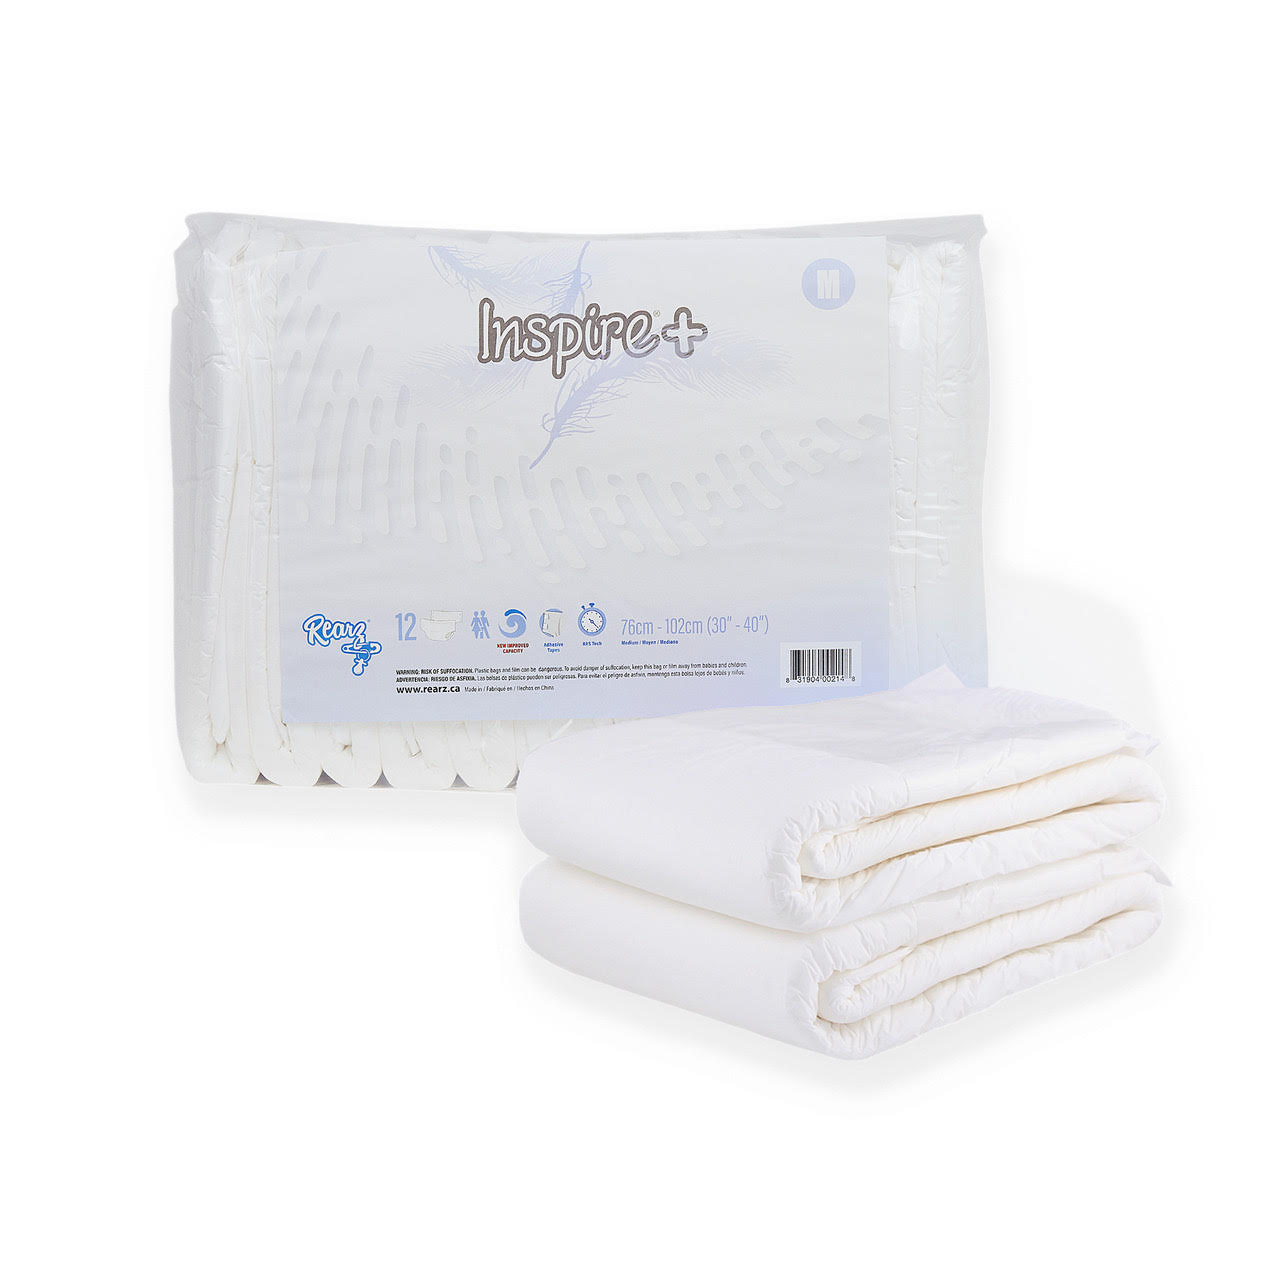 EveryCare  KosmoCare Adult Diapers (Large)